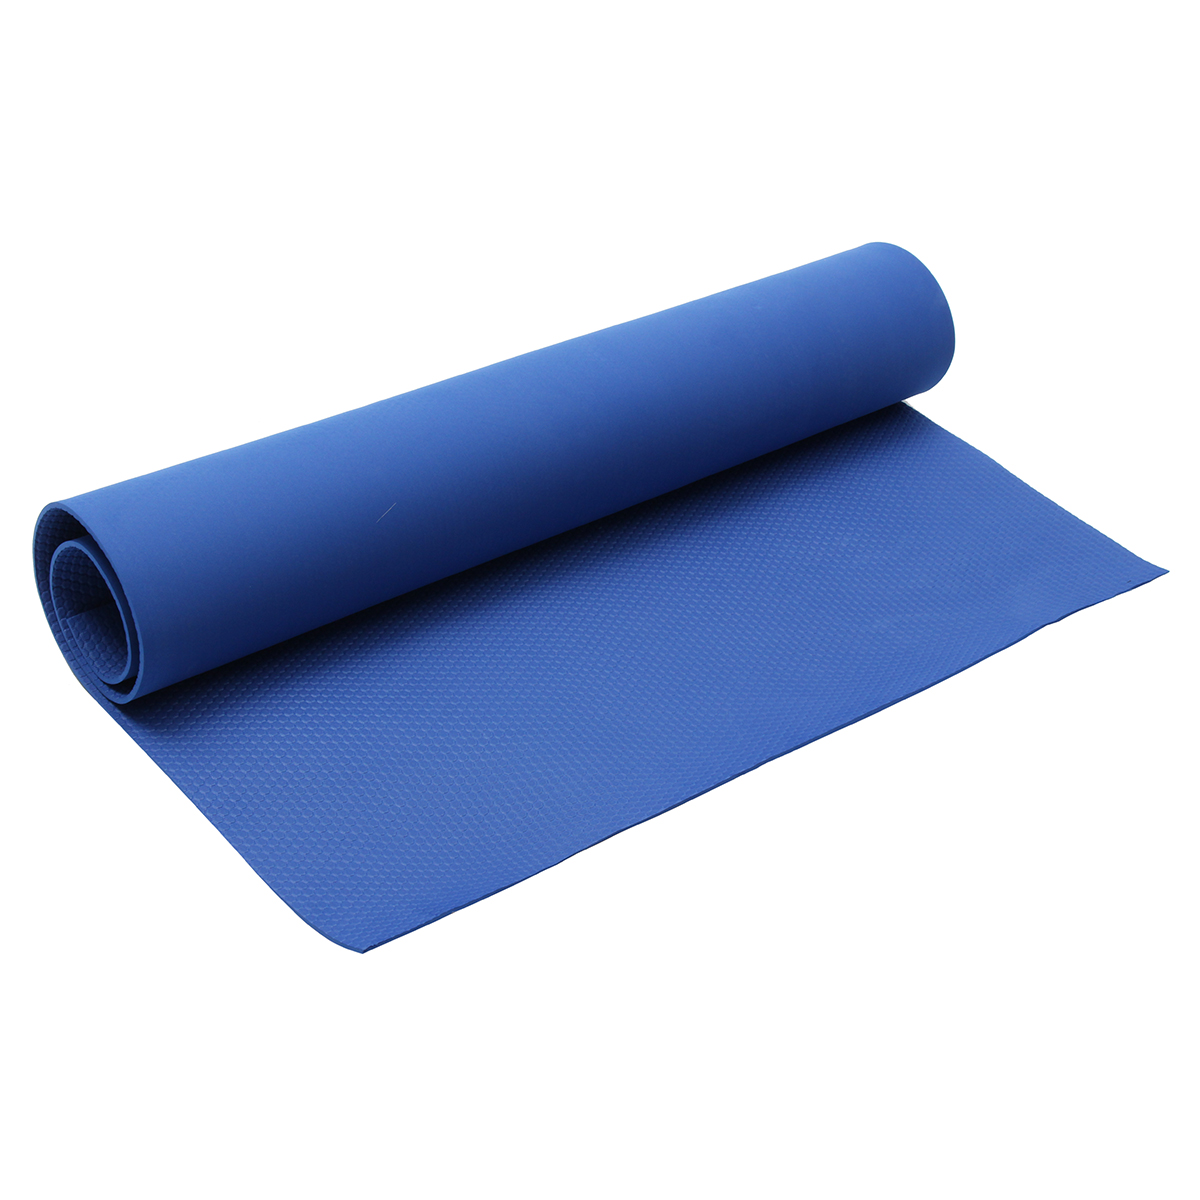 Multi-Size-PVC-Swimming-Pool-Anti-skip-Mat-Polyester-Cloth-Easy-To-Clean-Square-Swimming-Pool-Cover-1176086-2